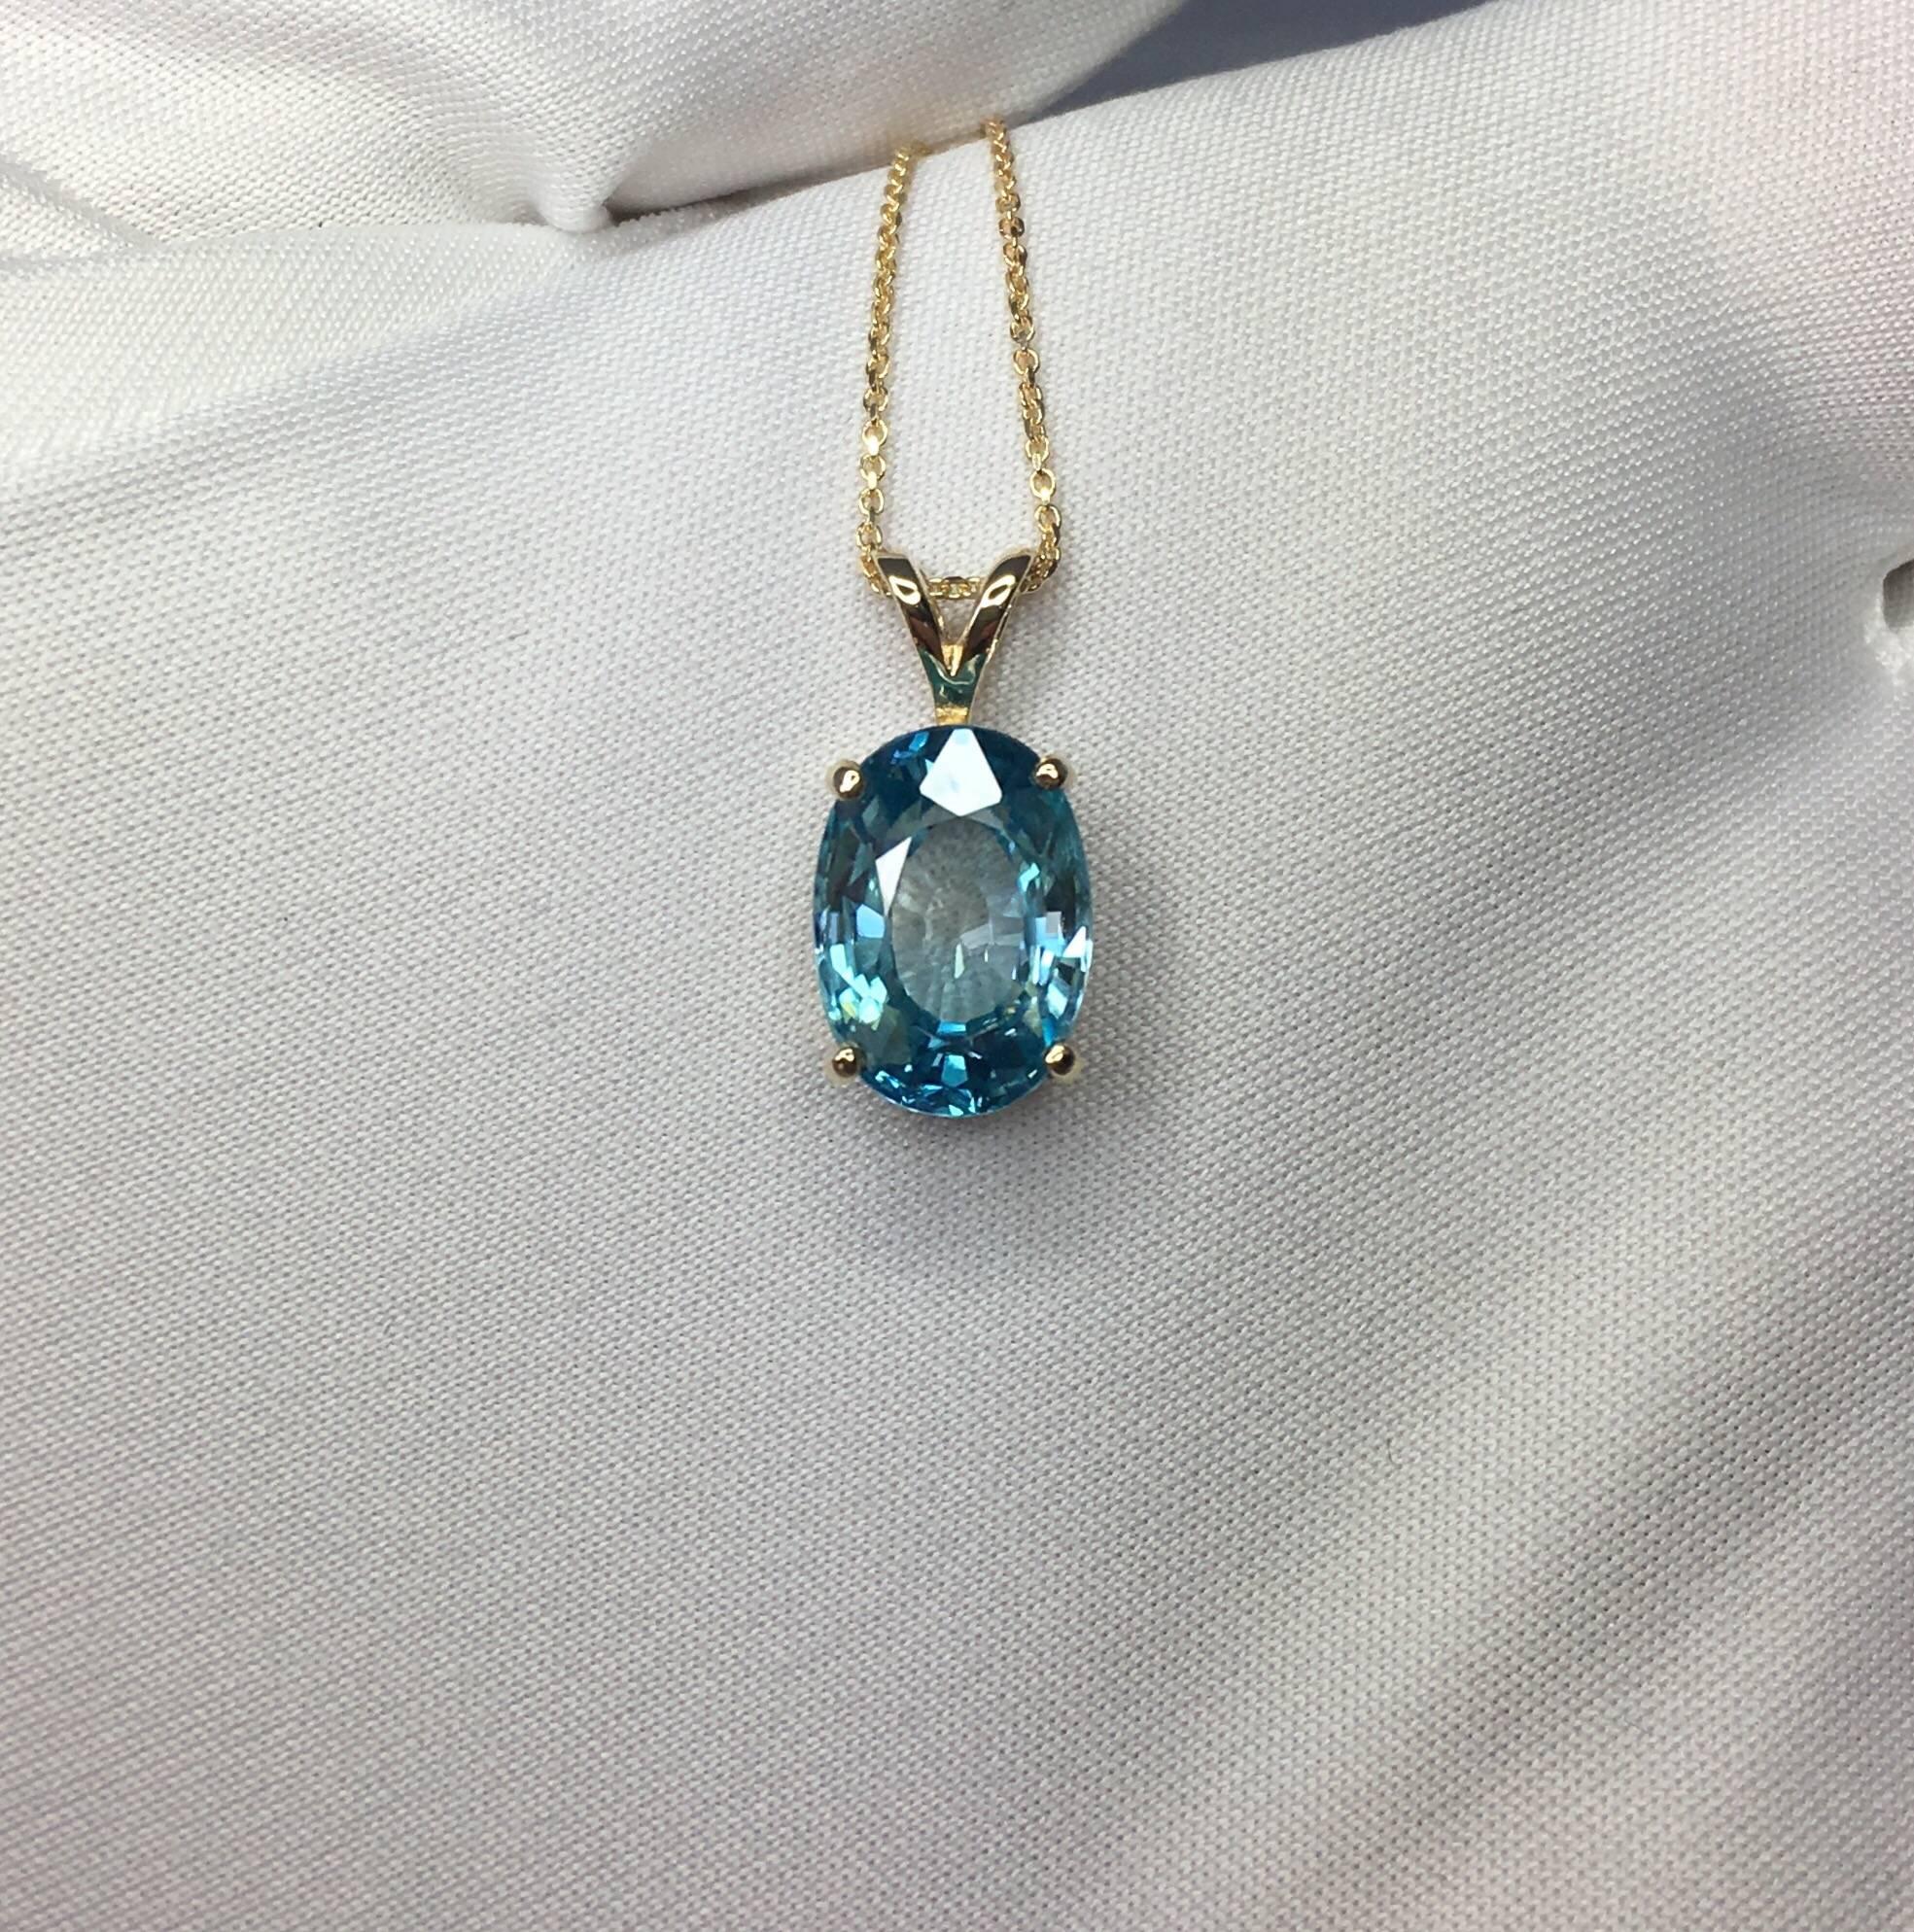 Beautiful natural large 5.40 carat blue zircon.
Set in a fine 14k yellow gold solitaire pendant.

Stunning blue zircon with a vivid neon blue colour and excellent clarity, practically flawless.

It also has an excellent oval cut which shows lots of